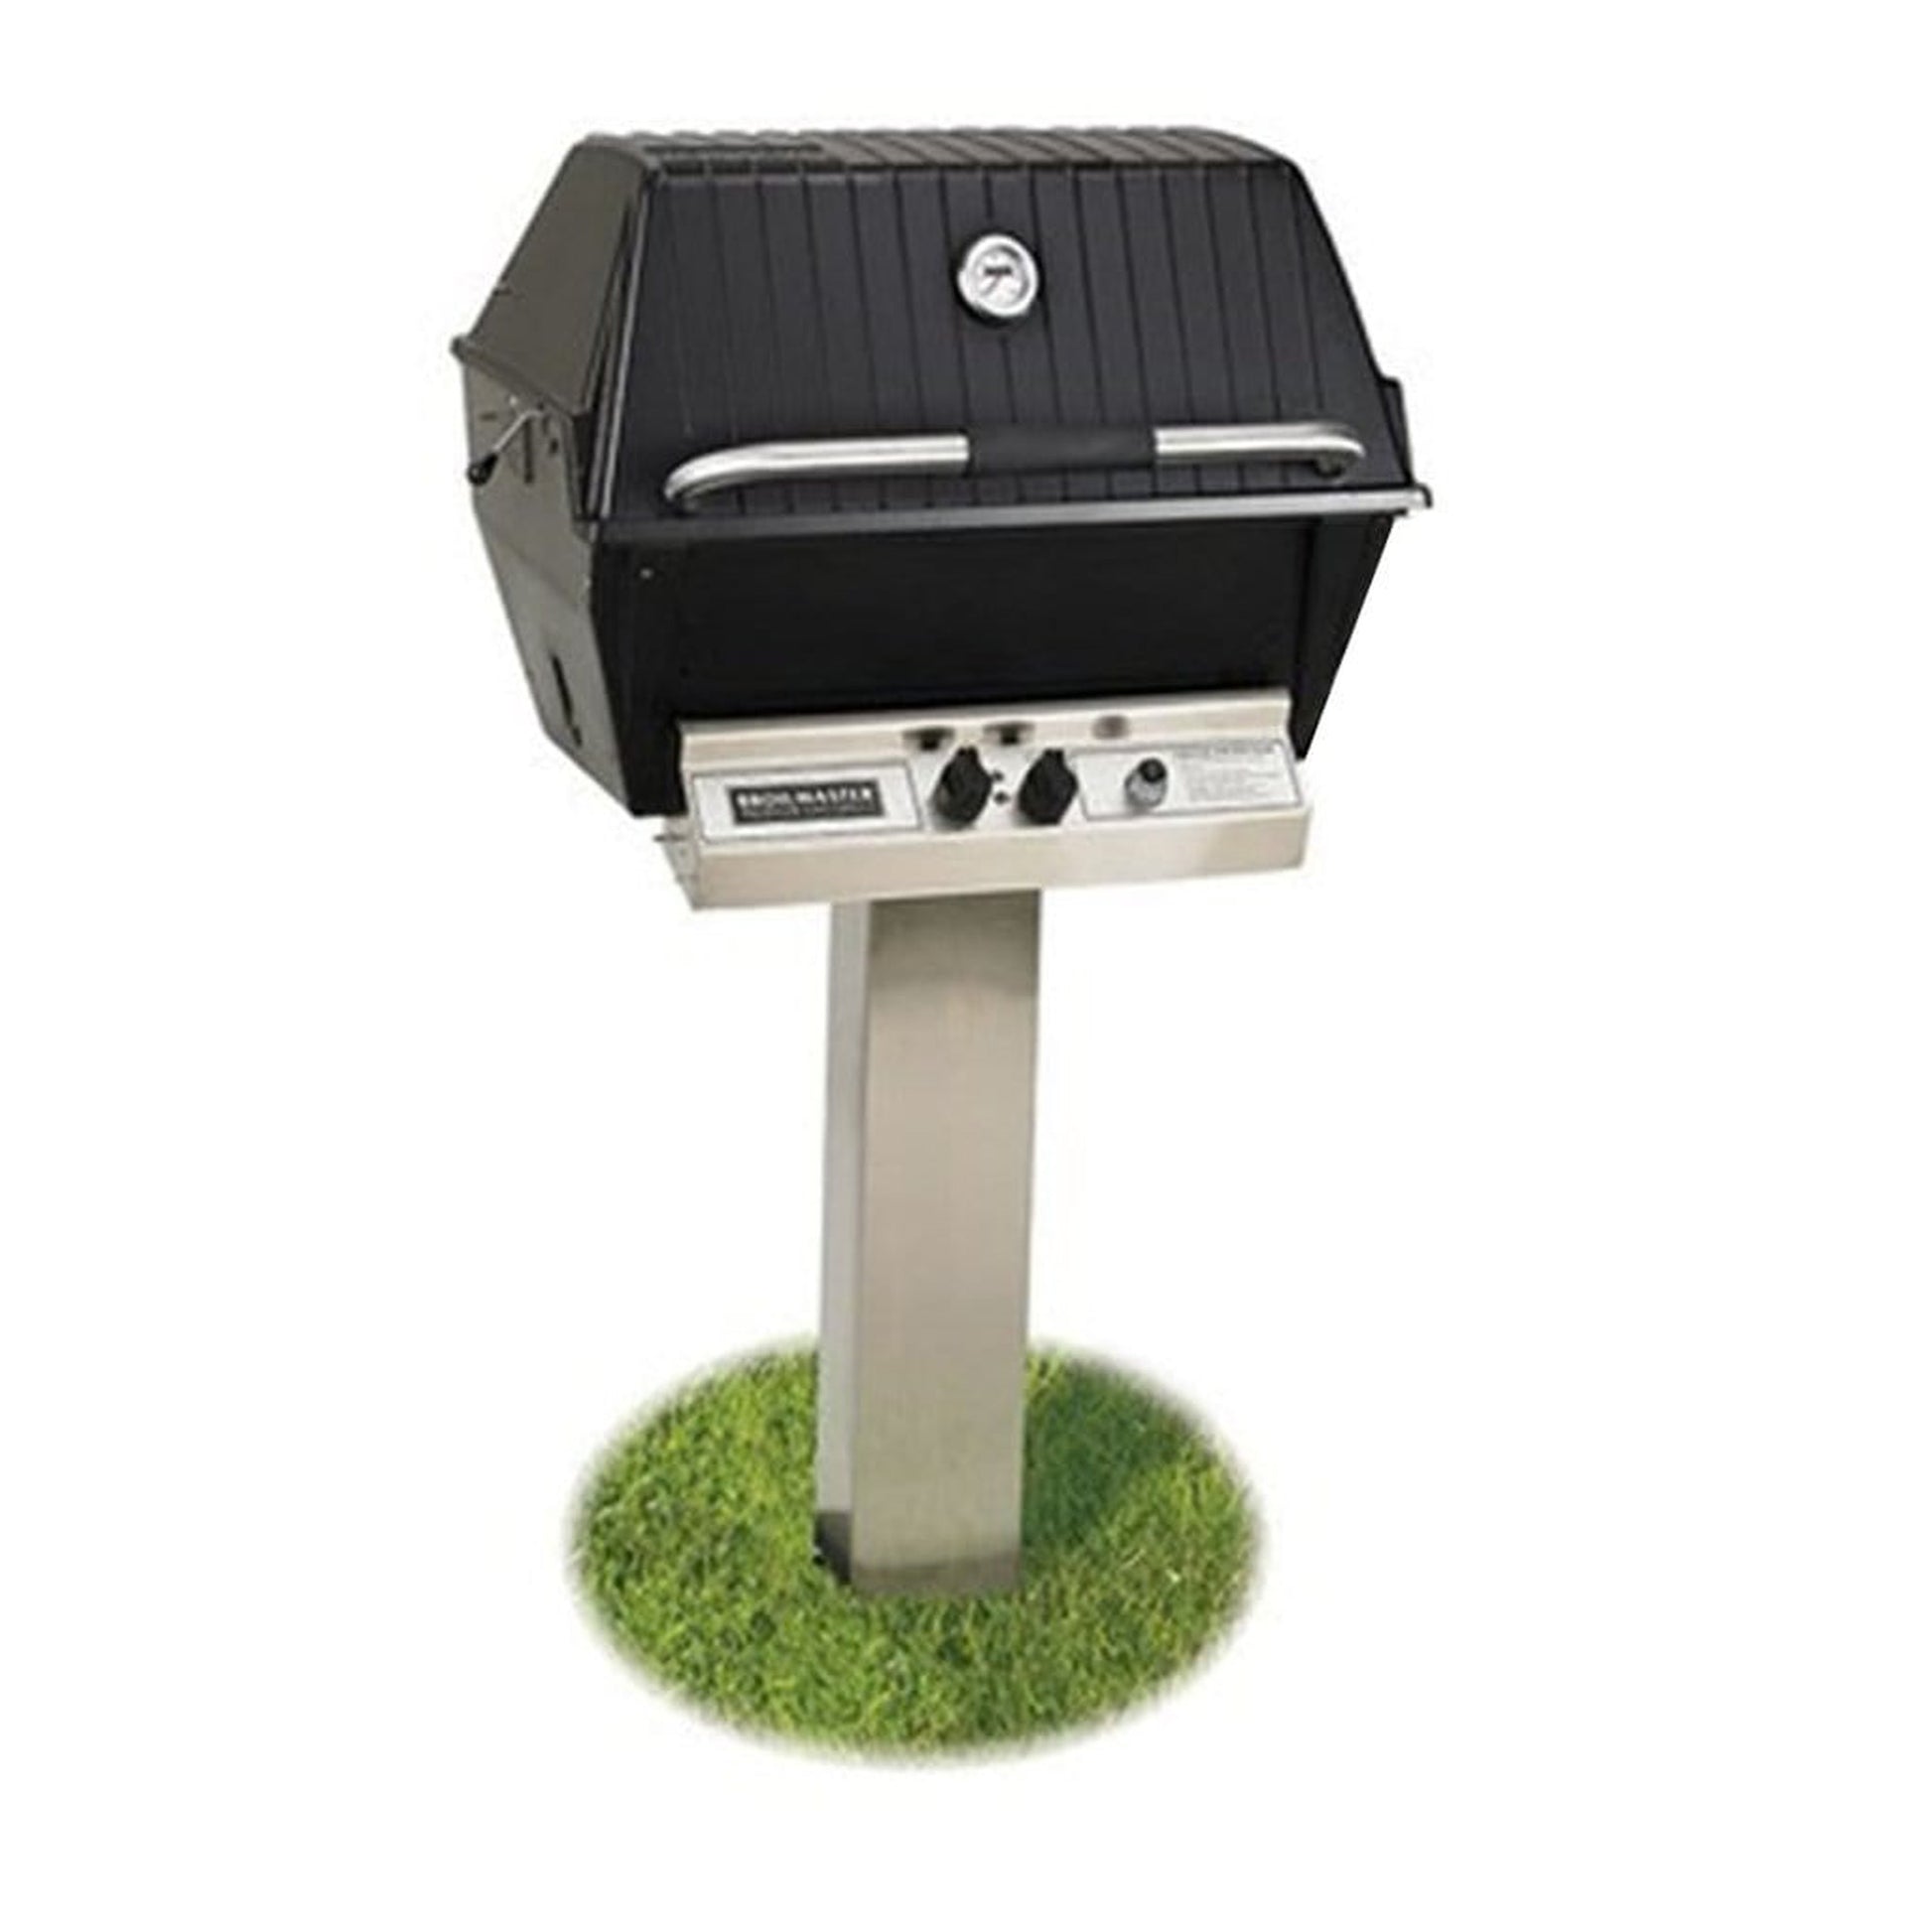 Broilmaster H4X Deluxe Gas Grill